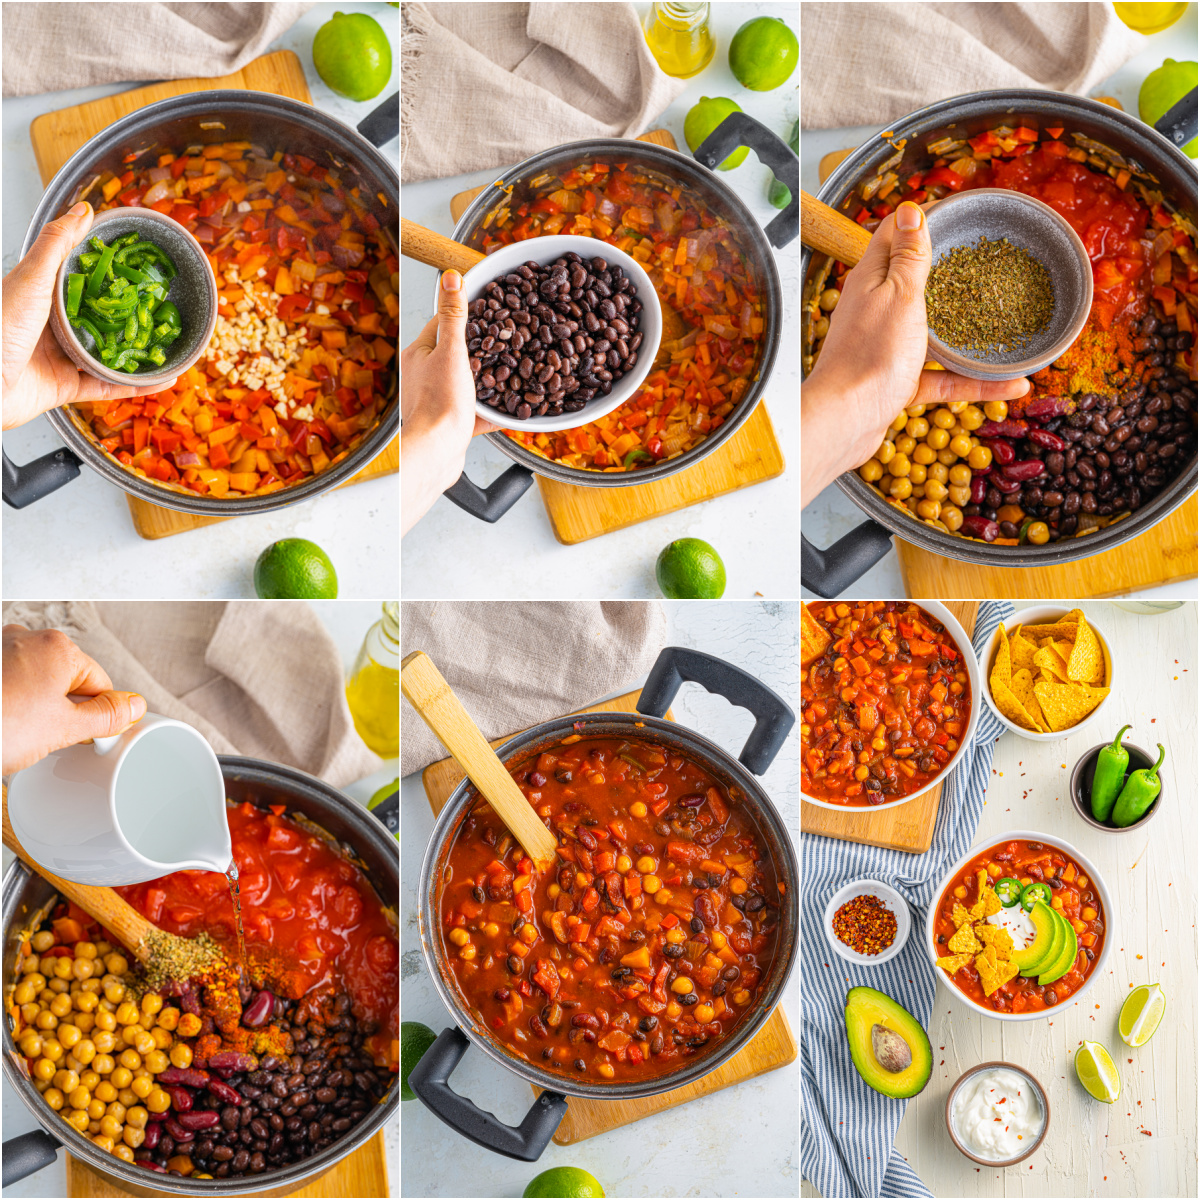 Step by step photos on how to make a Vegetarian Chili Recipe.